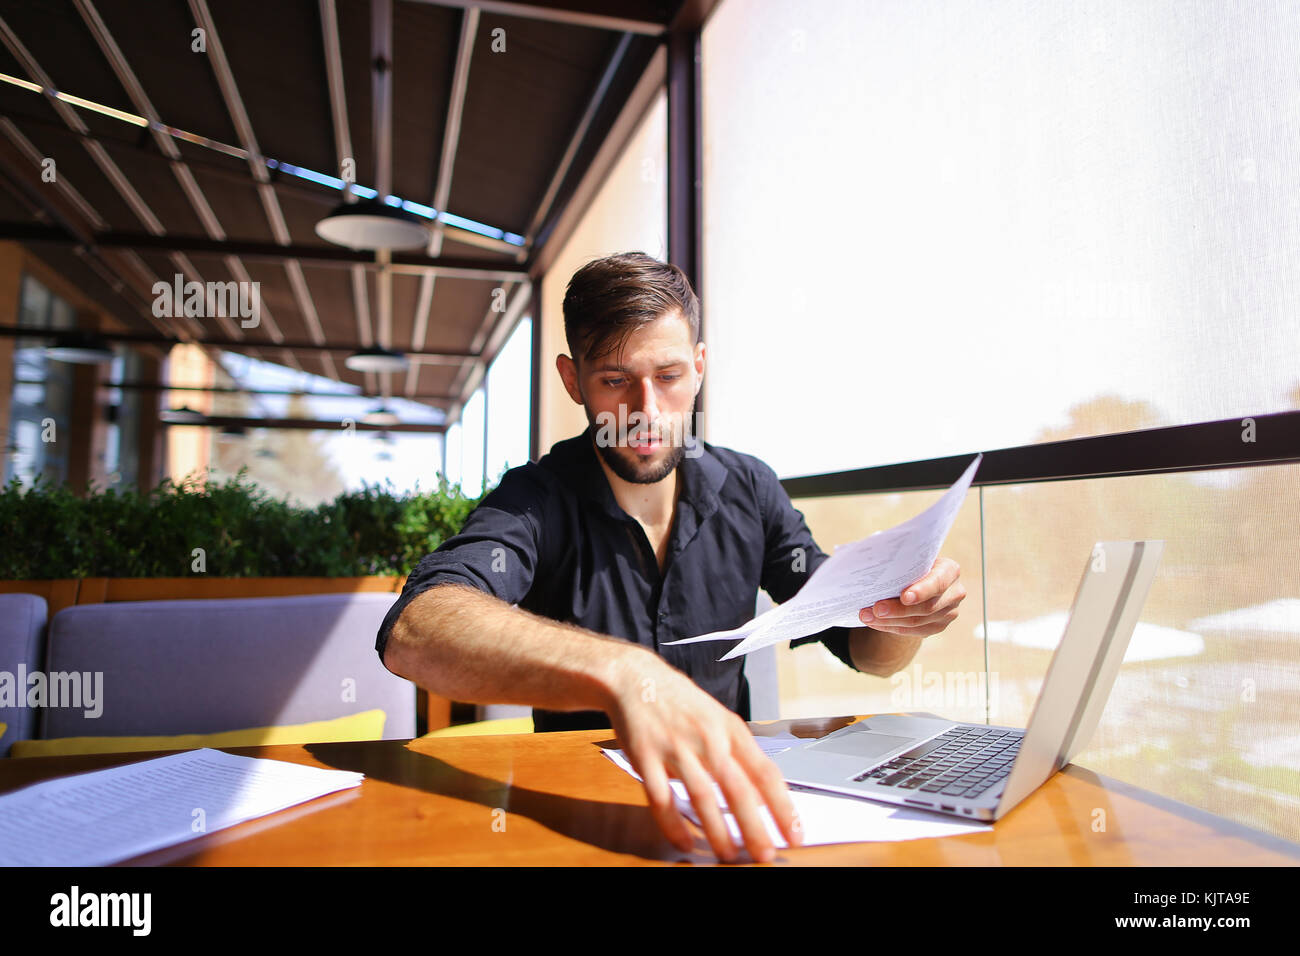 Office worker sorting papers on table near laptop. Stock Photo